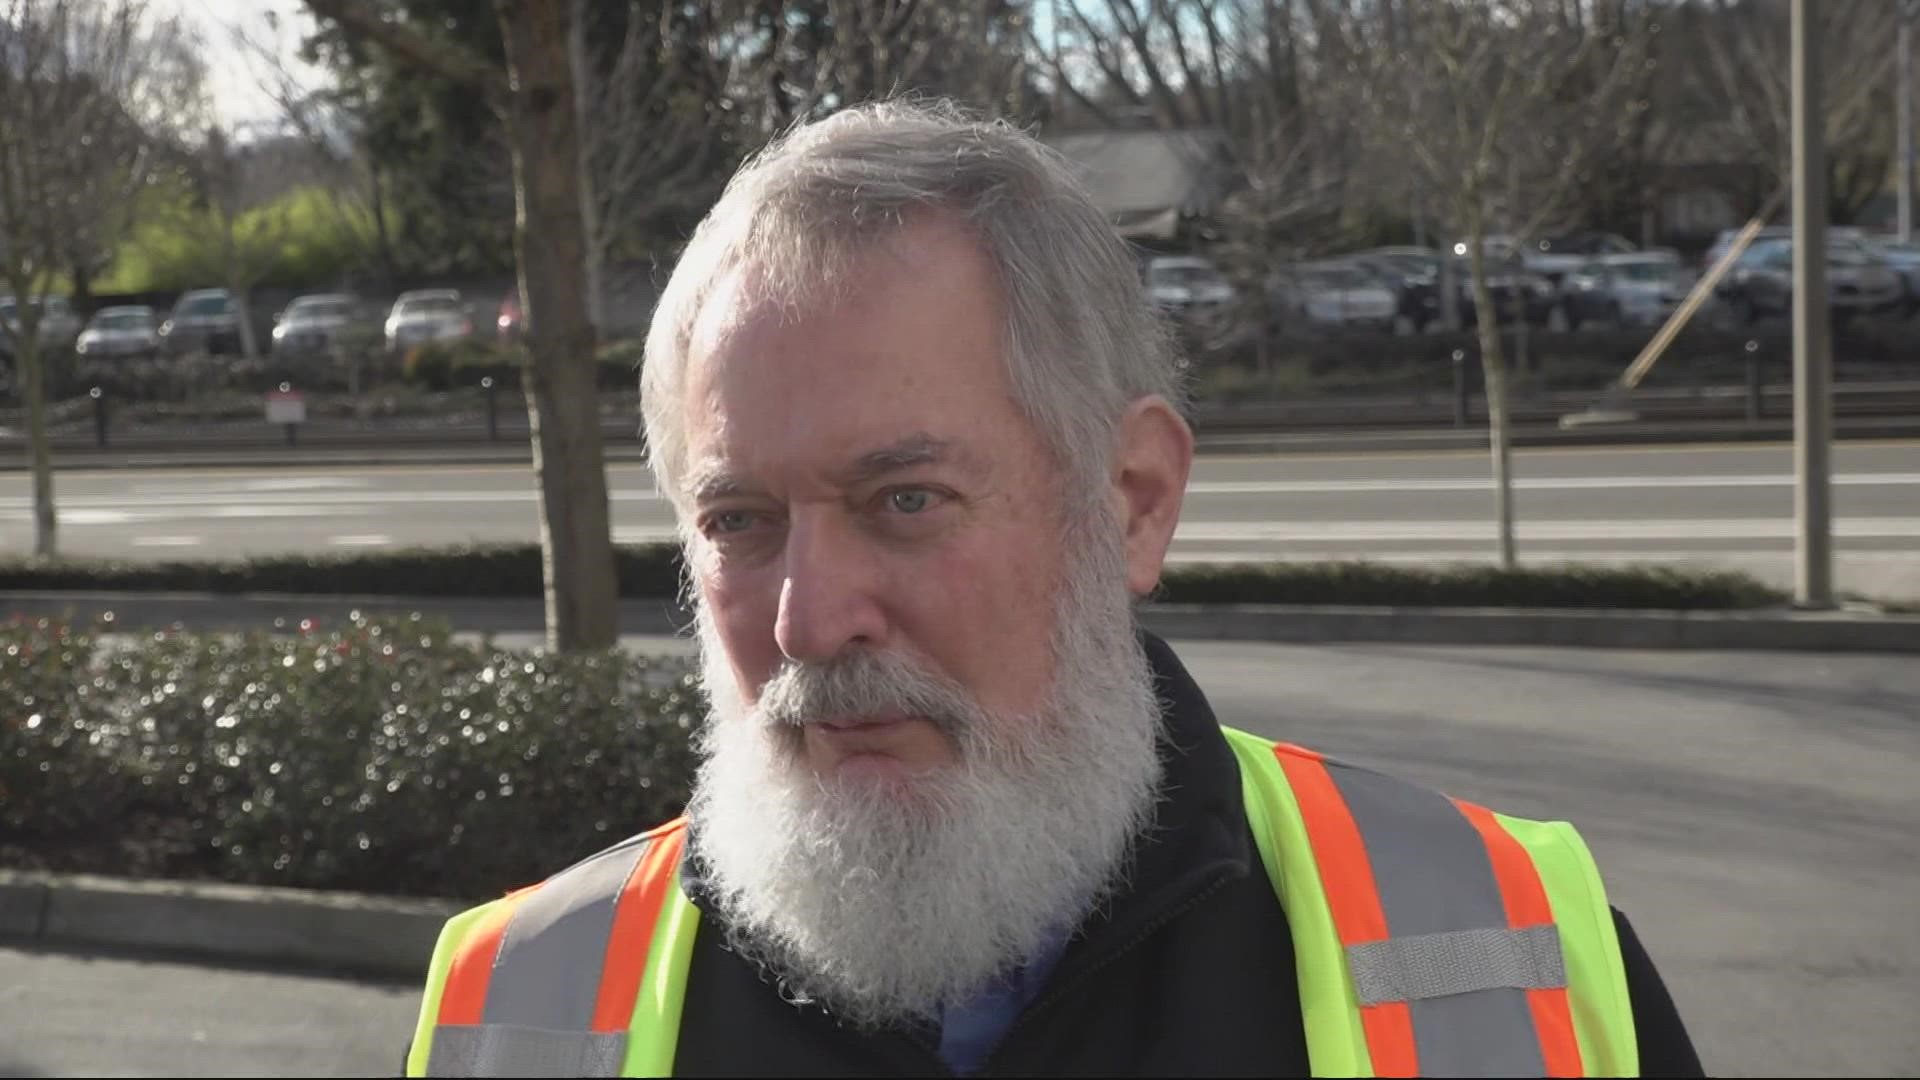 A TriMet bus driver who was hit by a stray bullet last May is back on the job. He spoke to KGW's Bryant Clerkley about his long road to recovery.